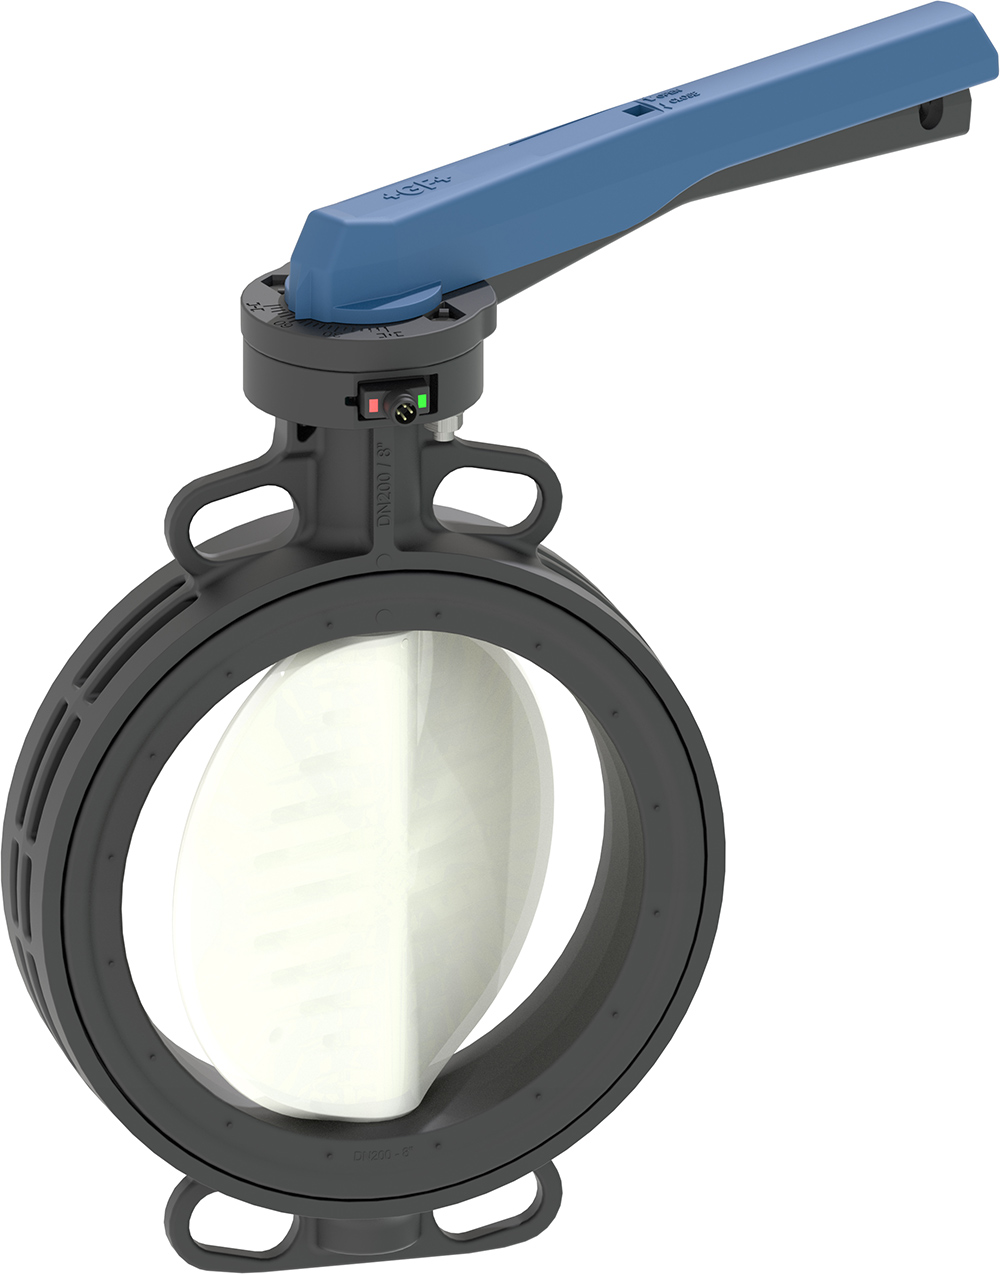 Thermoplastic butterfly valve from GF Piping Systems